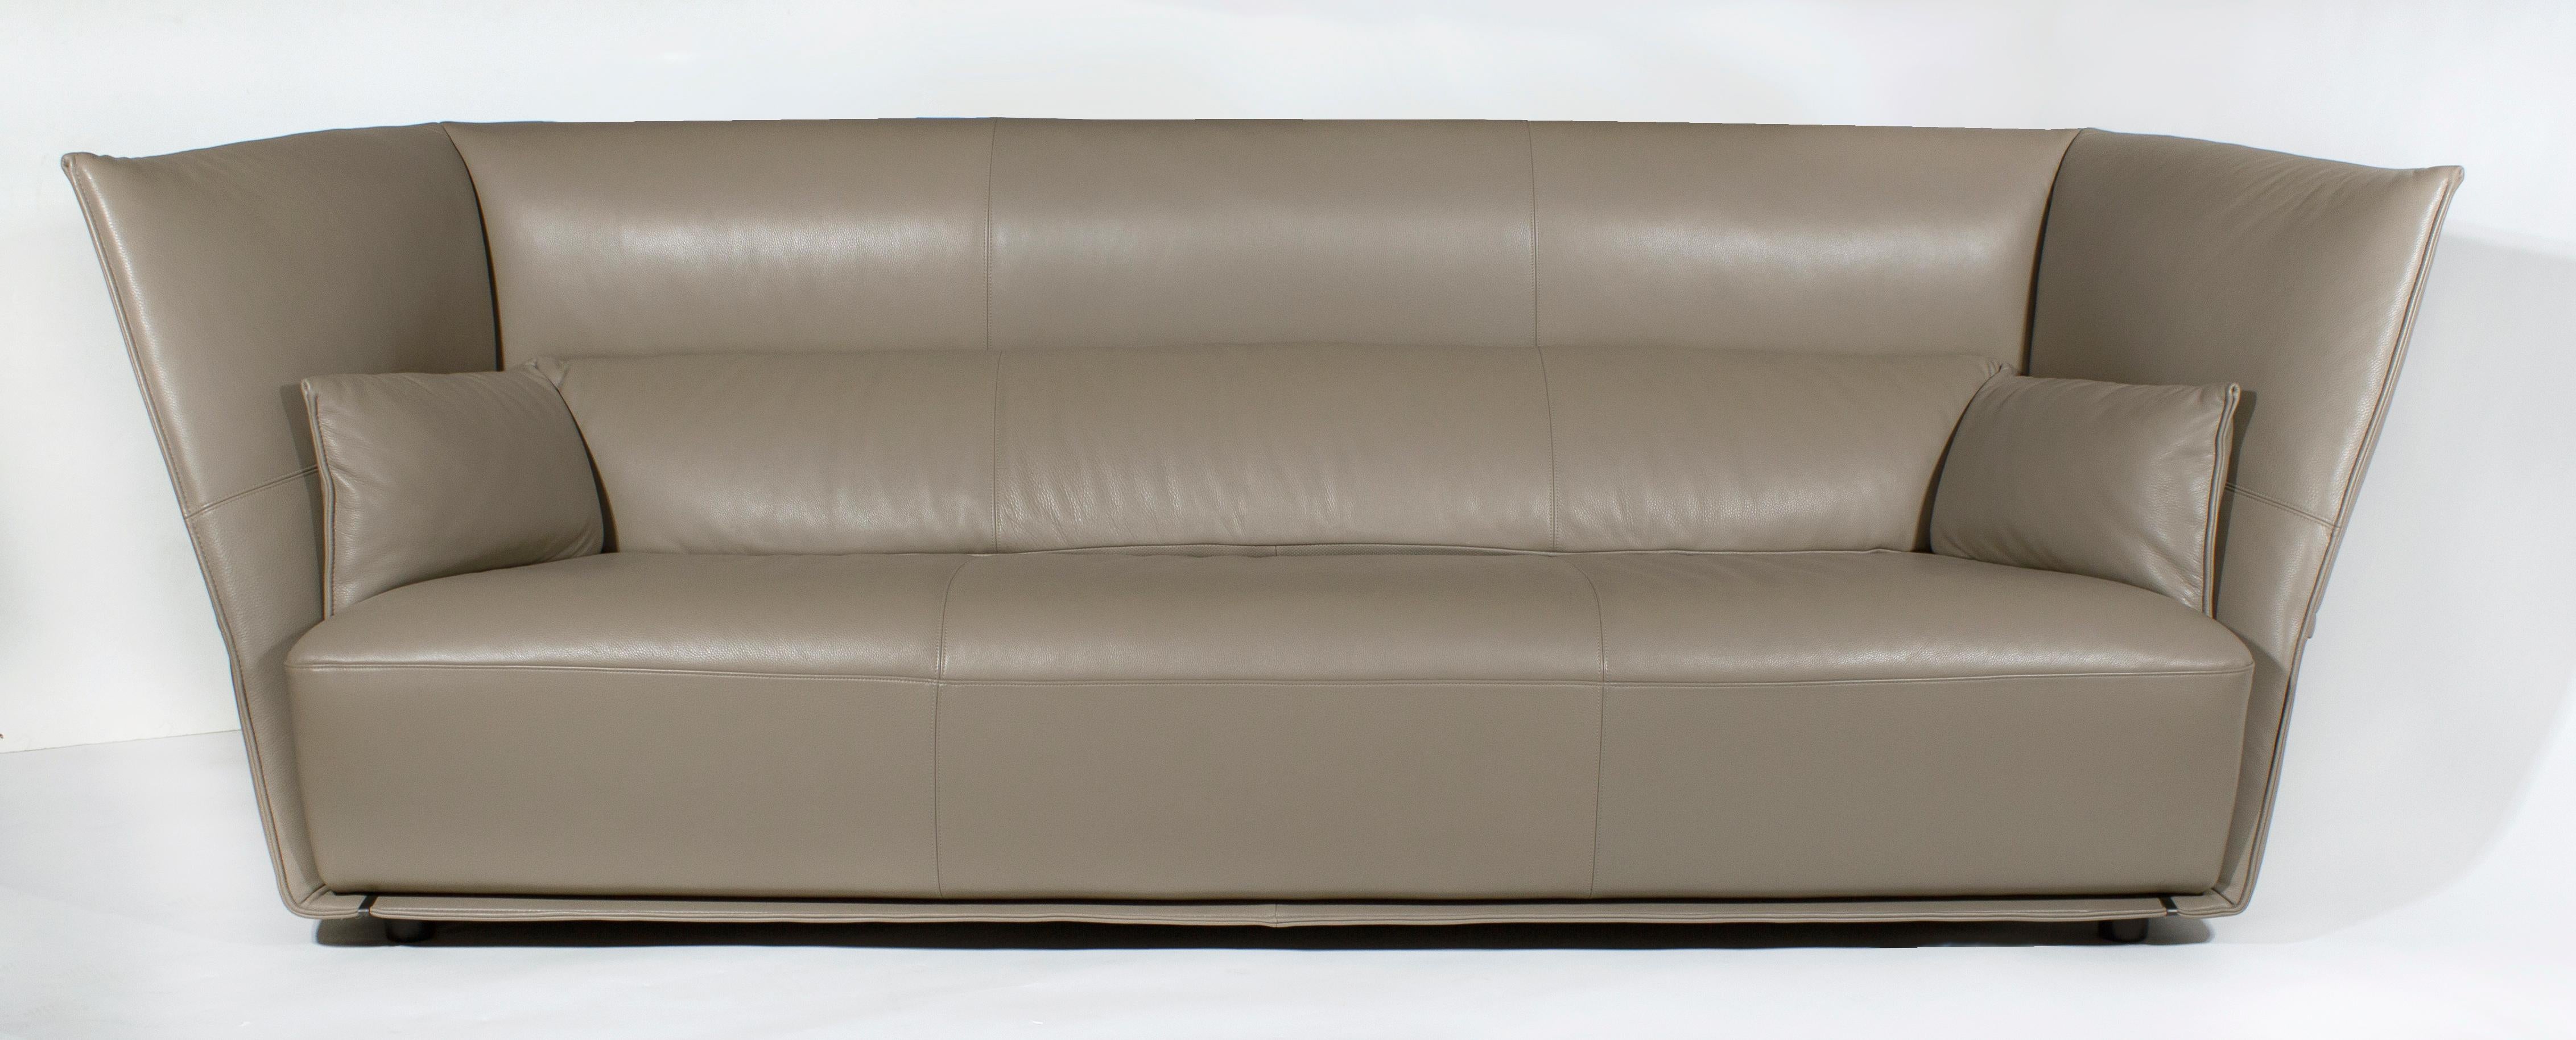 Extraordinarily comfortable sofa that hugs you in all the right places and encompasses the whole body creating a seating environment. The full grain leather upholstery is soft to the touch and is in either the SC34 Maggese or SC40 Cachemire